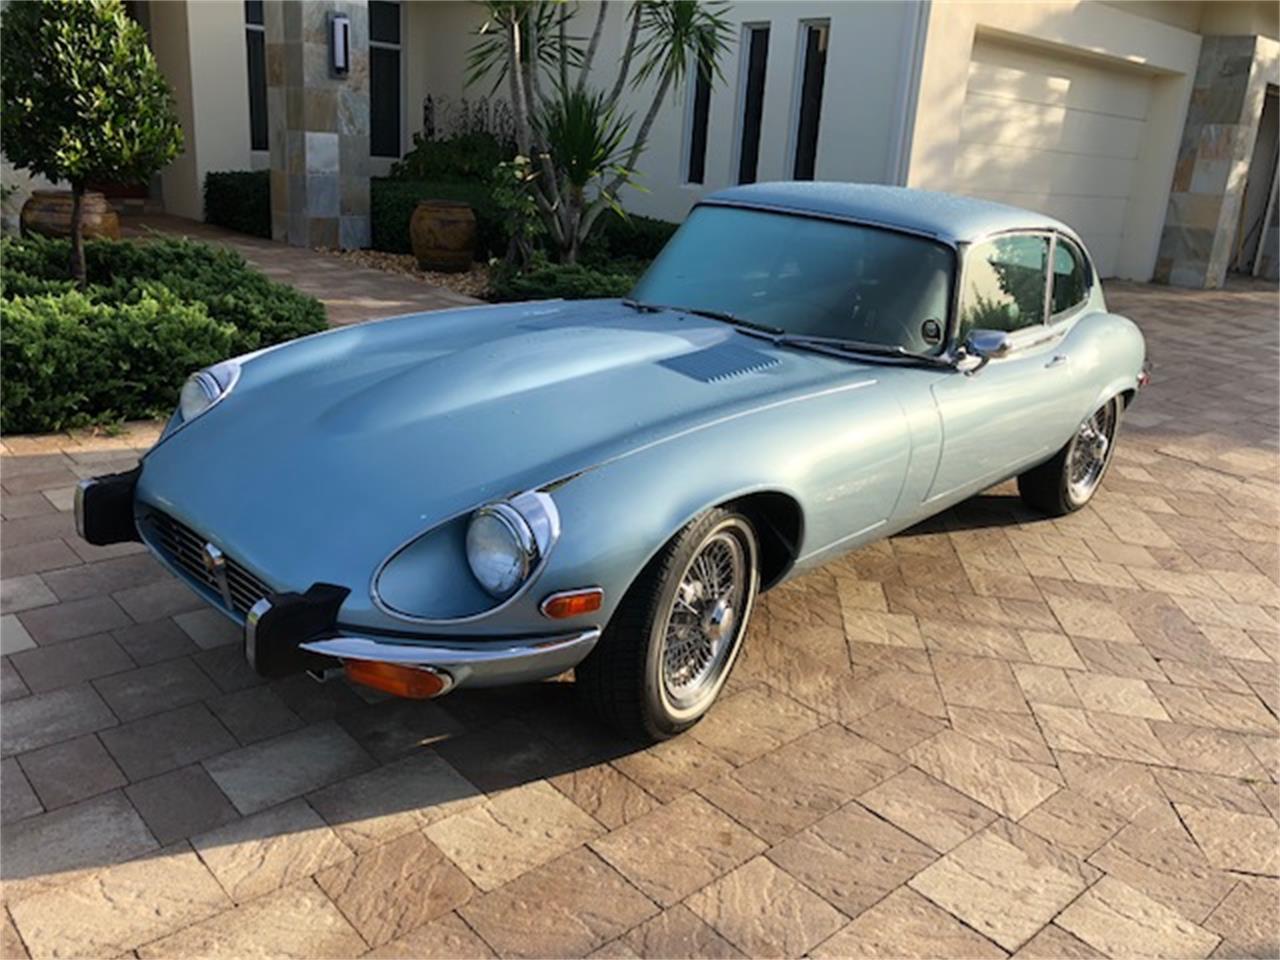 Andy's old E-Type was certainly in far worse condition than this one. | ClassicCars.com photo